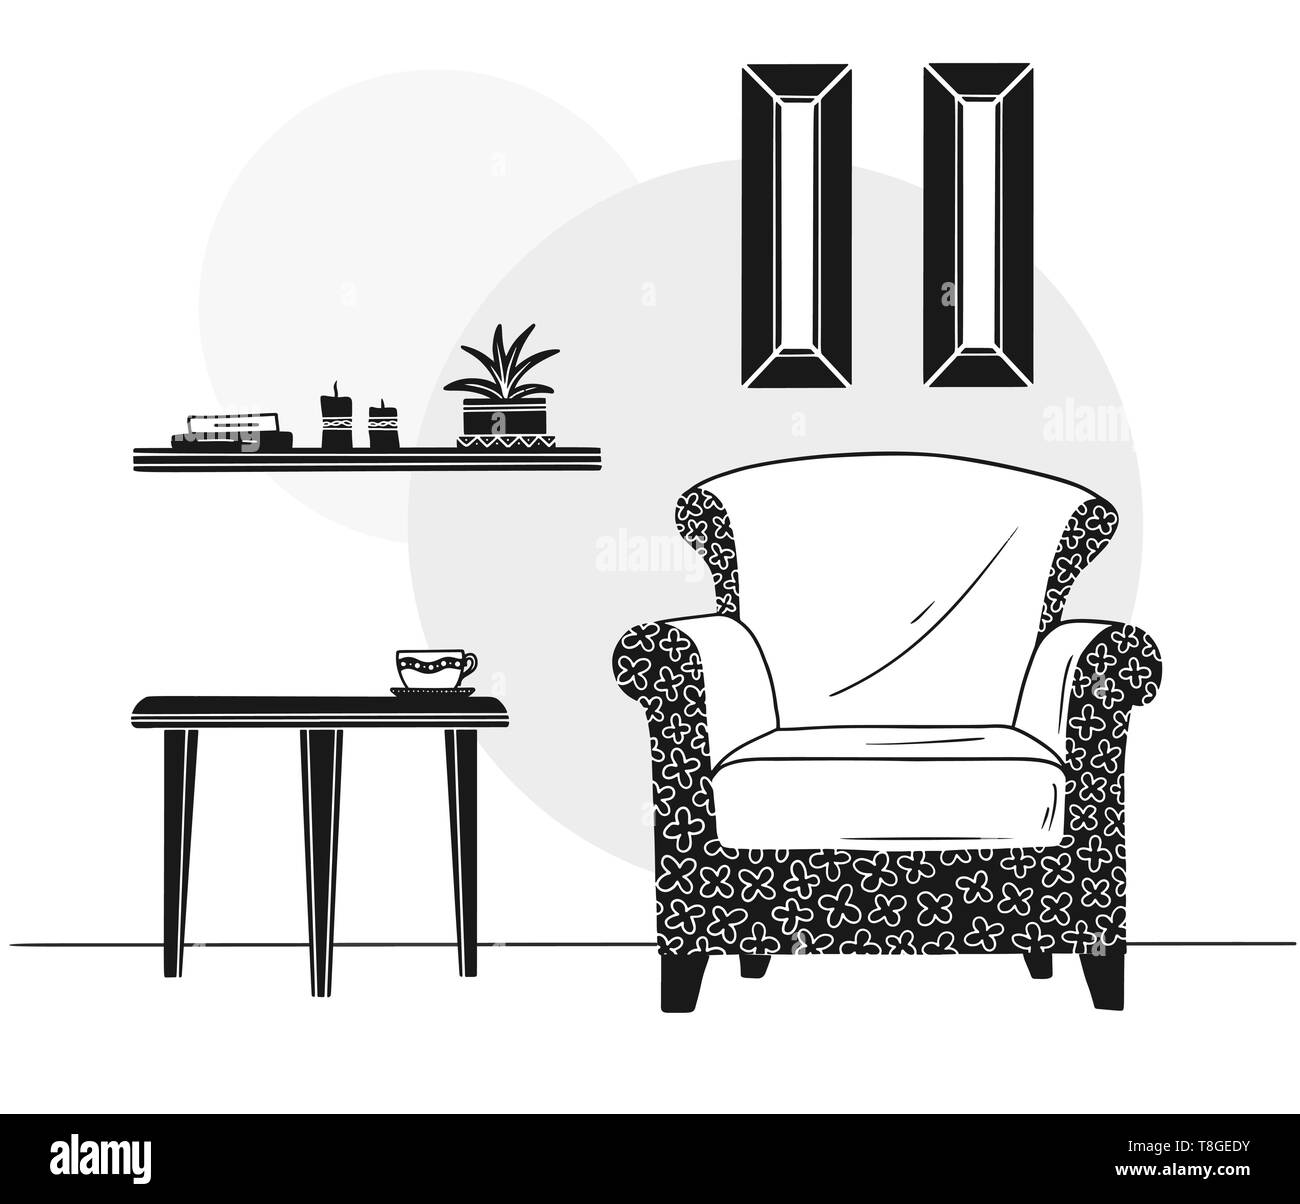 Chair, table with mug. Shelf with books and plants. Hand drawn vector illustration of a sketch style Stock Vector